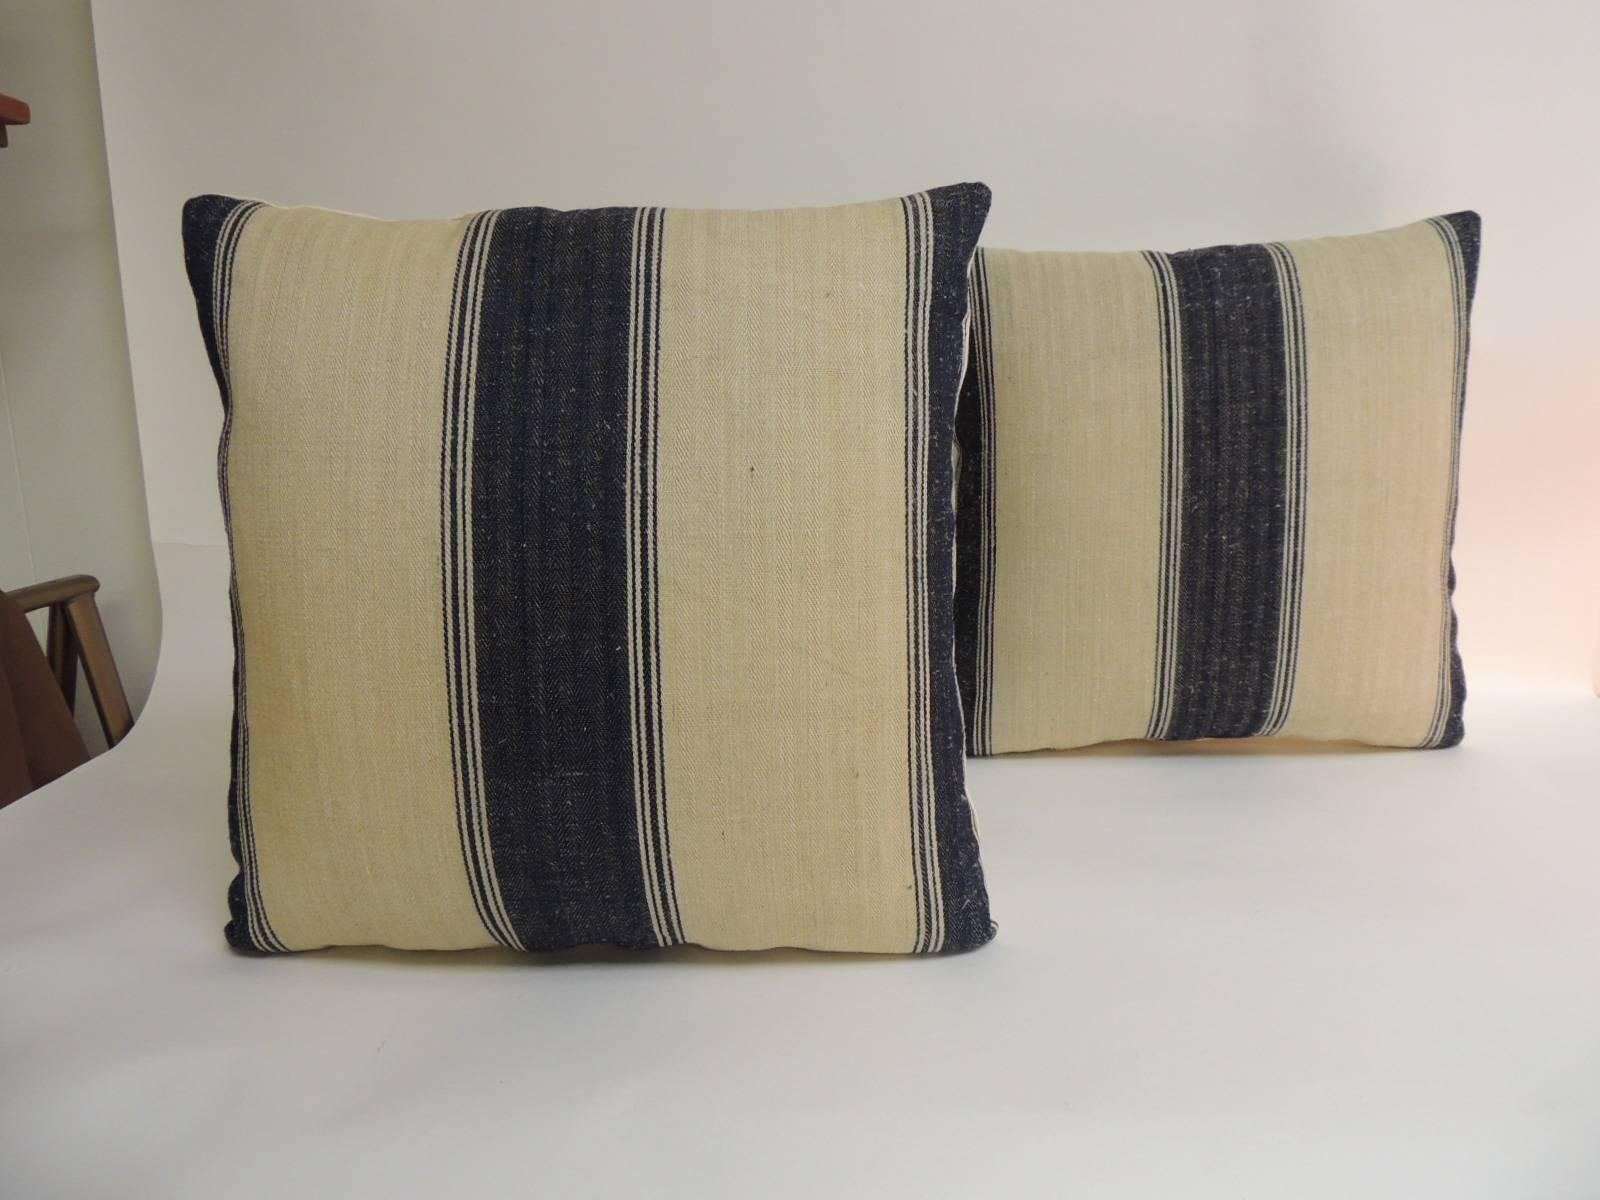 Pair of 19th century French stripes square decorative pillows in dark blue. Decorative pillows show vertical stripes on tan with a chevron woven homespun textile. French decorative cushions finalized with natural linen backings. In shades of blue,